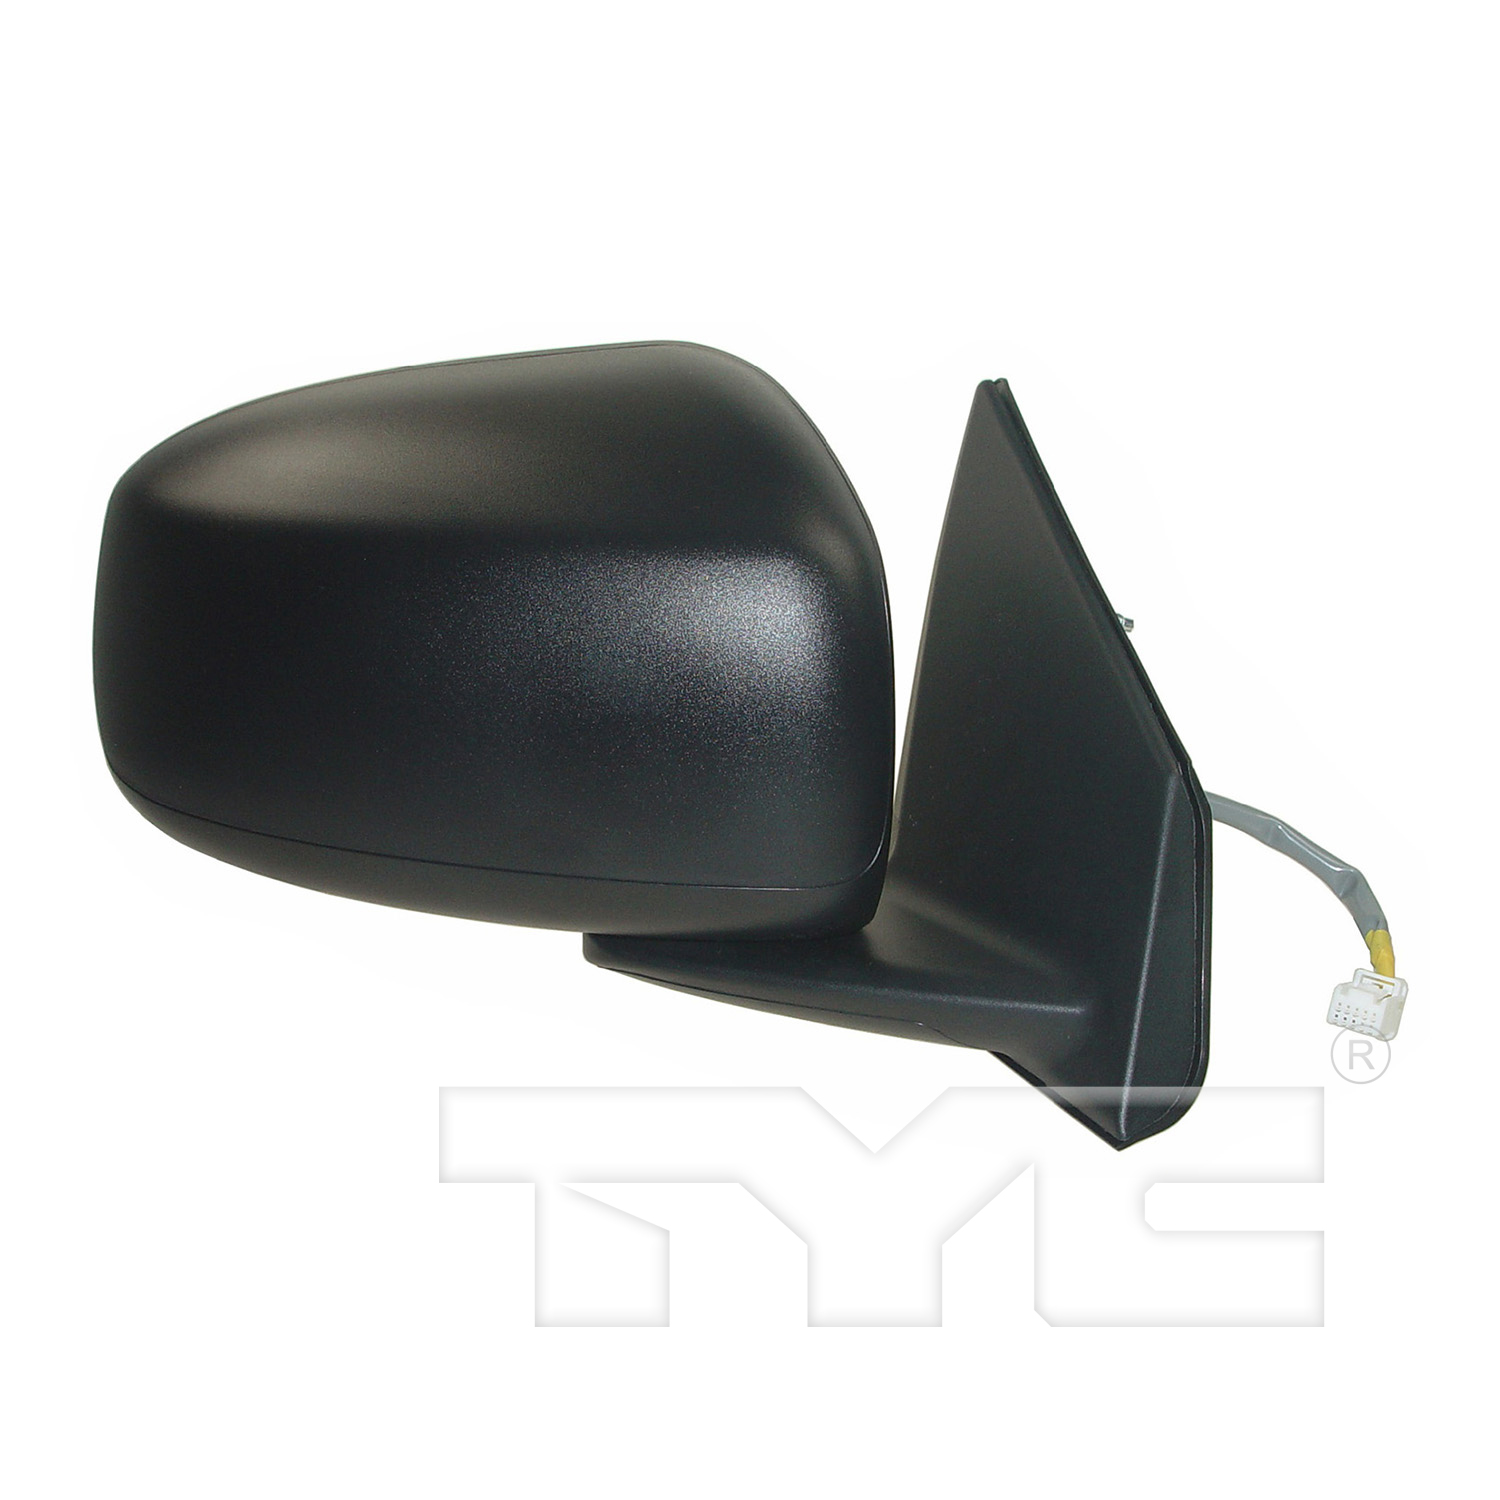 Aftermarket MIRRORS for MITSUBISHI - LANCER, LANCER,15-16,RT Mirror outside rear view